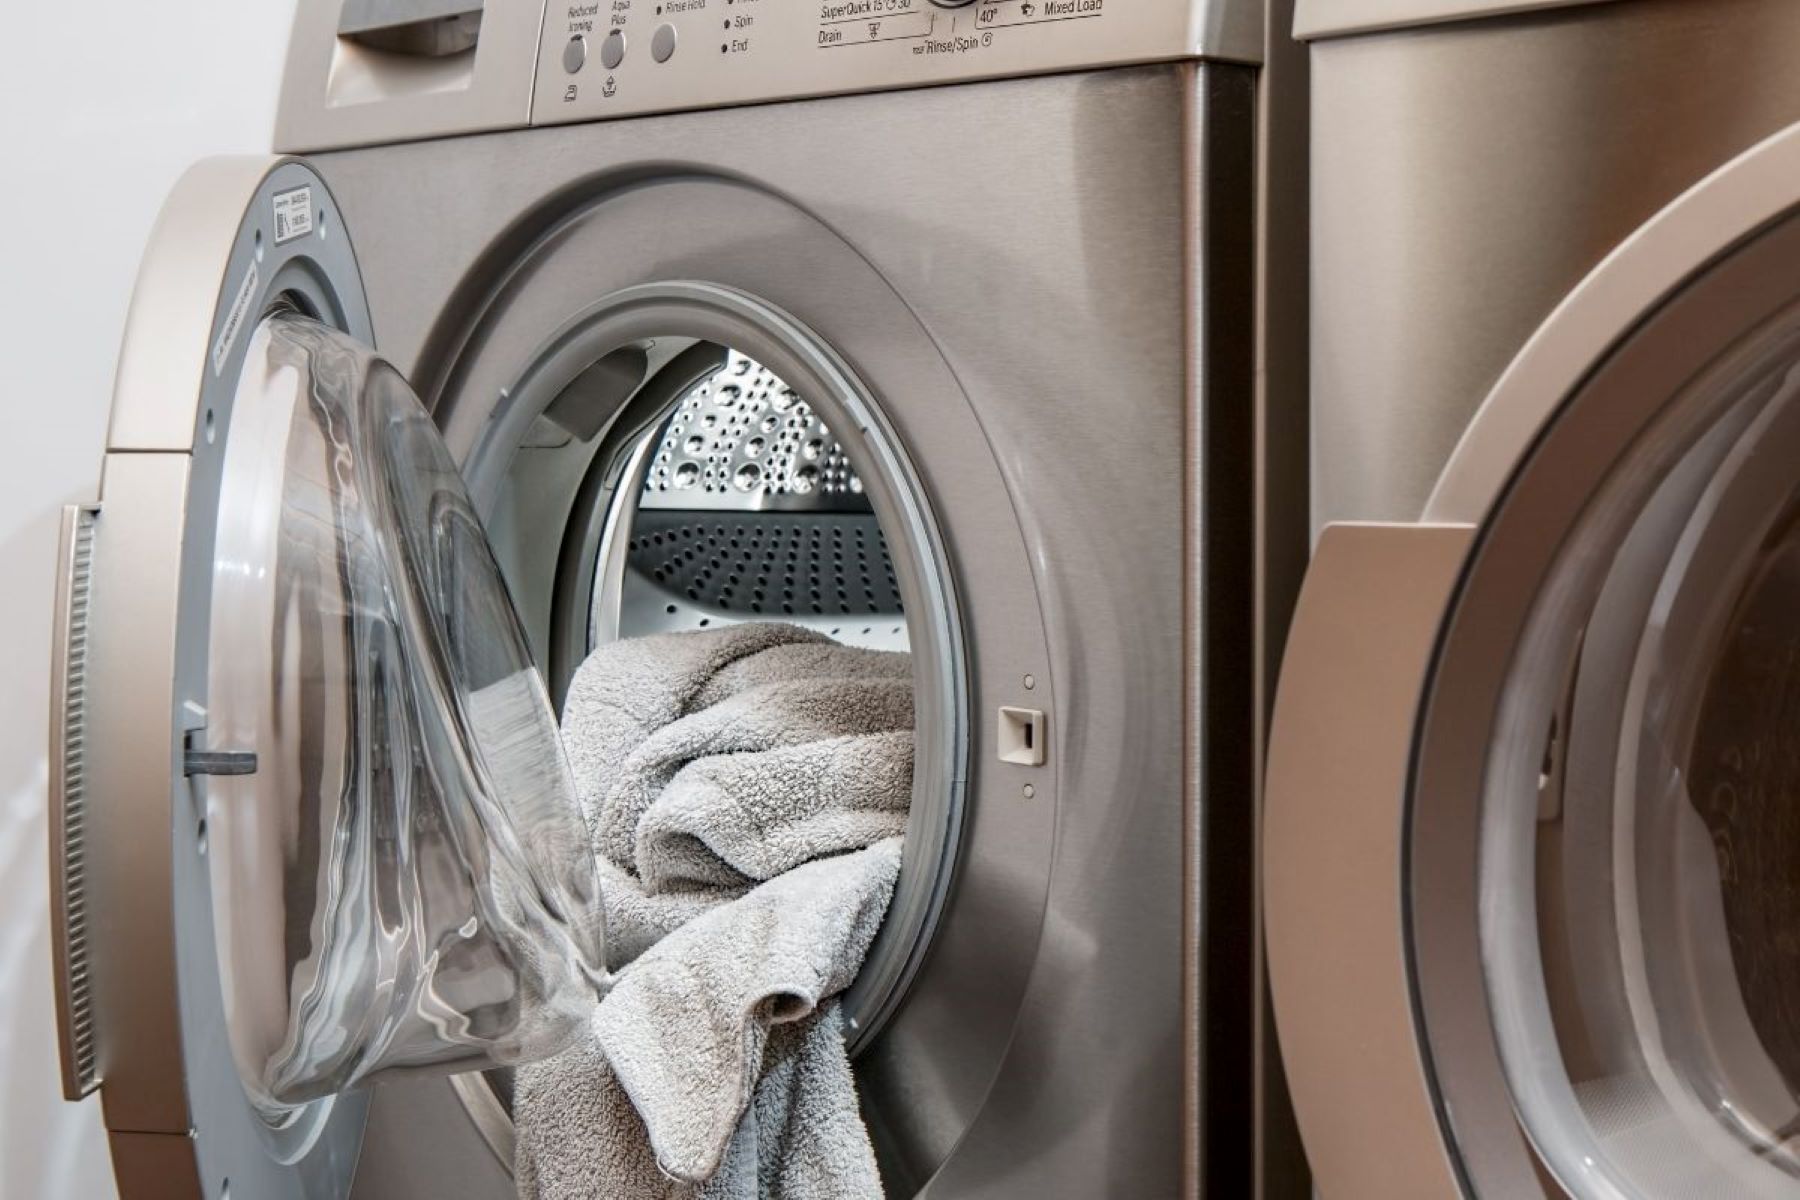 How To Fix The Error Code F84 For Whirlpool Dryer